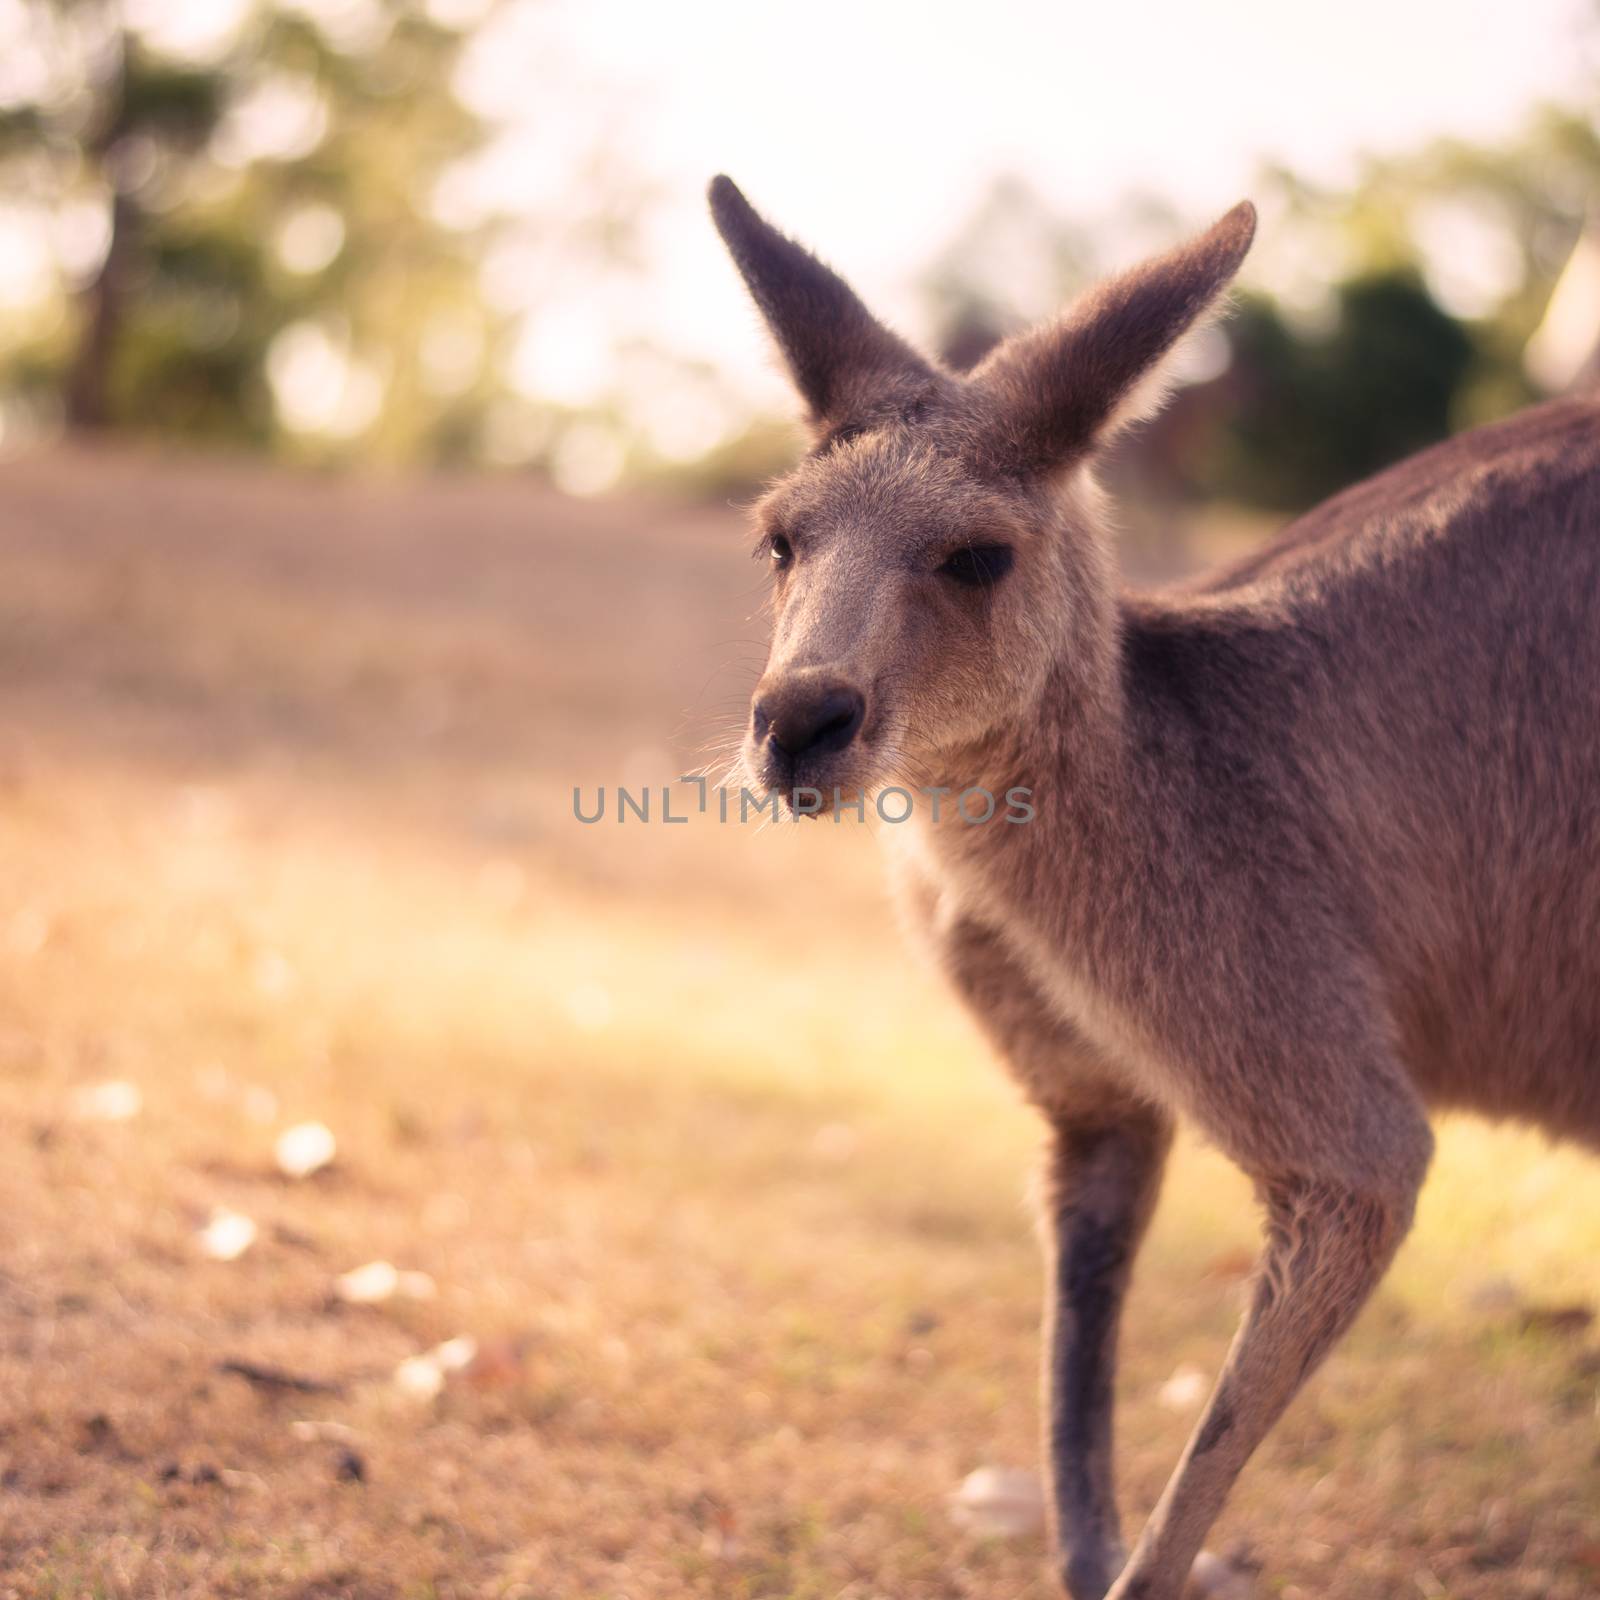 Kangaroo outside during the day by artistrobd